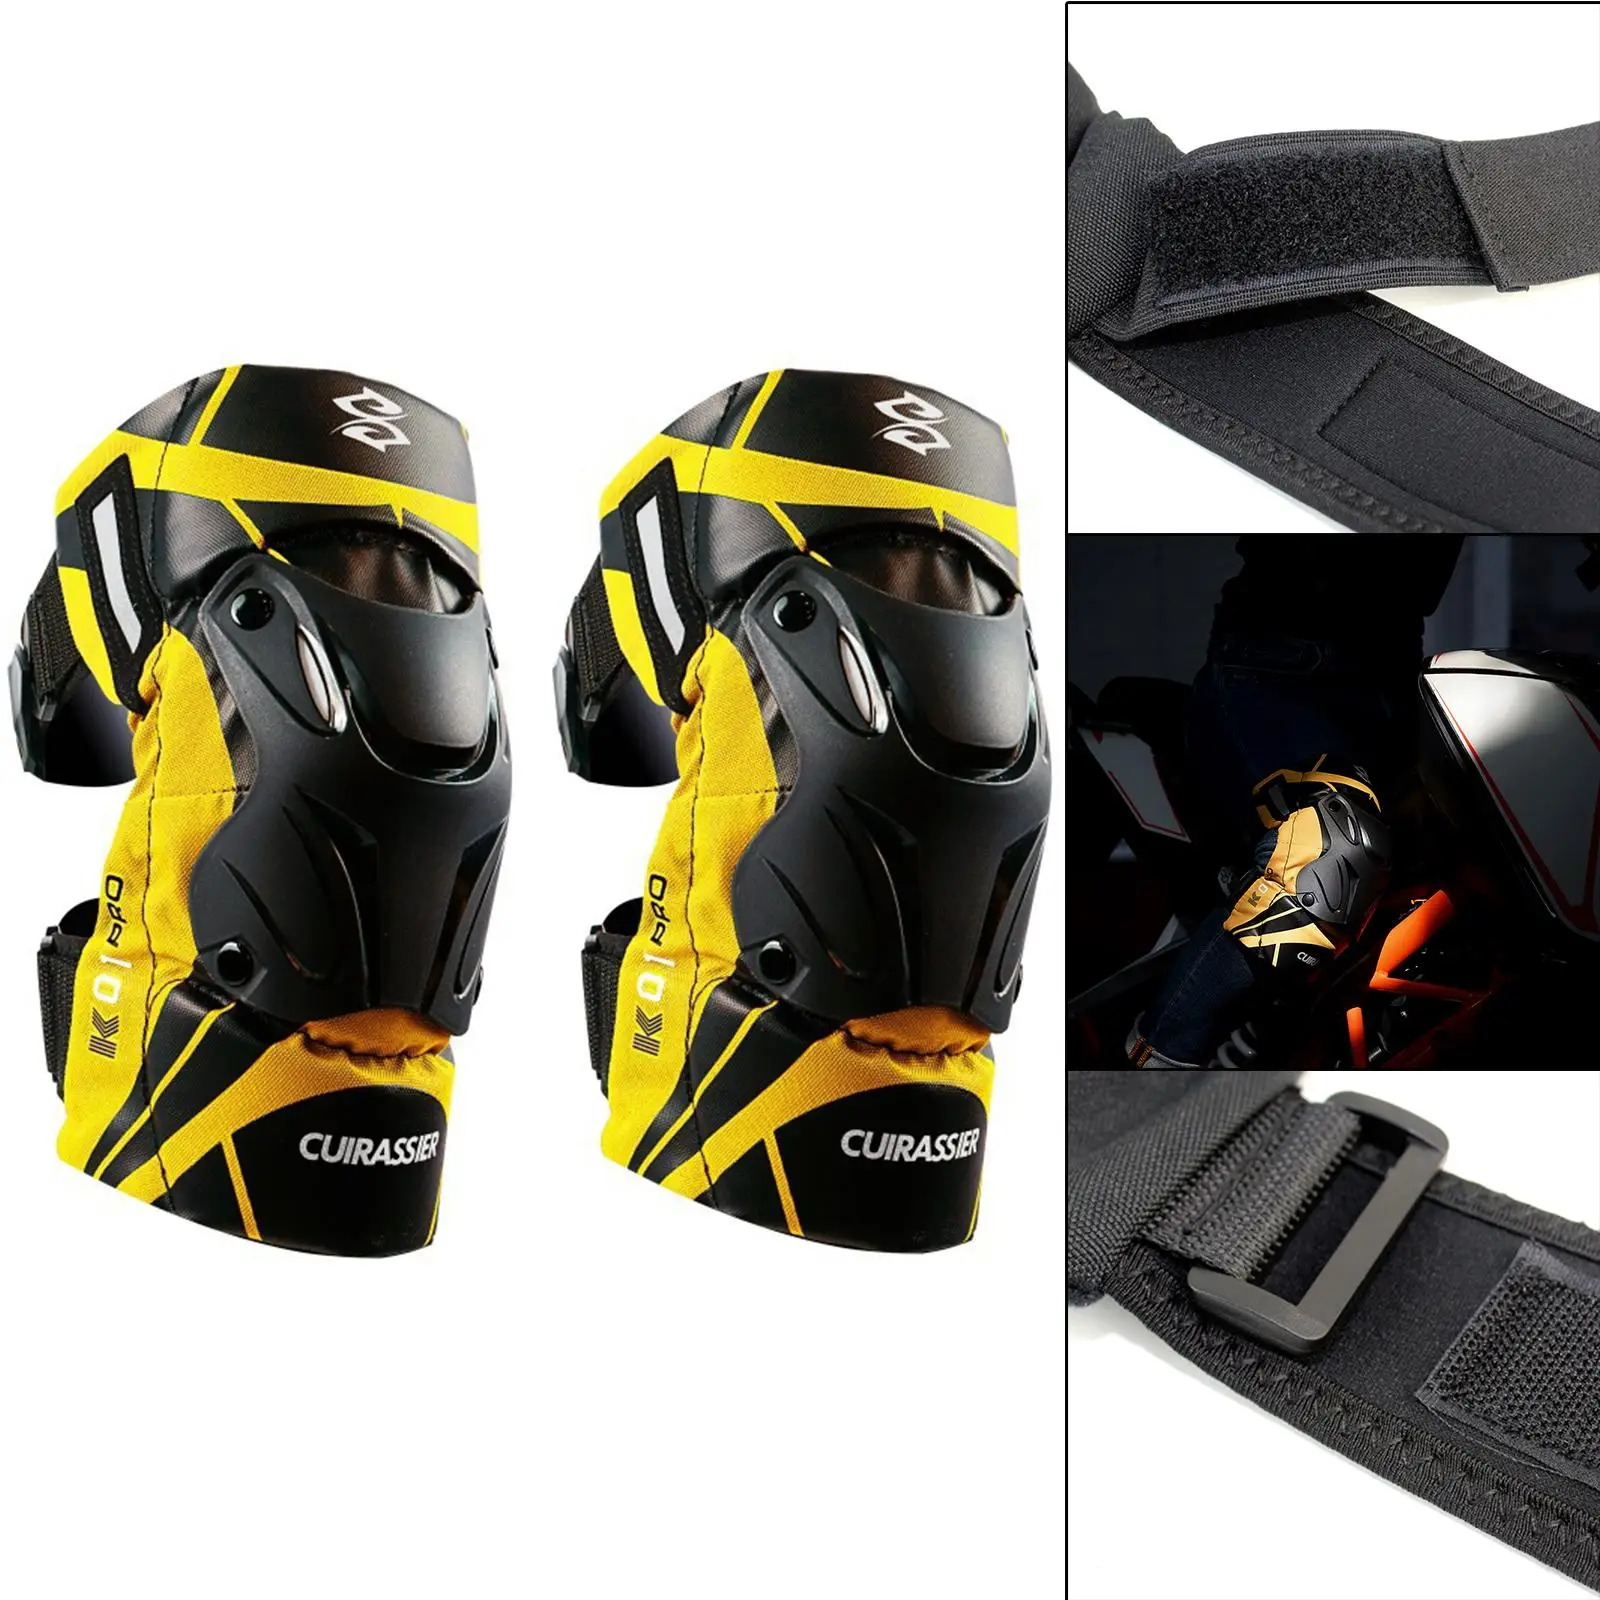 2x Motorcycle Knee Pads Guard for Motocross Racing Thermal Insulation